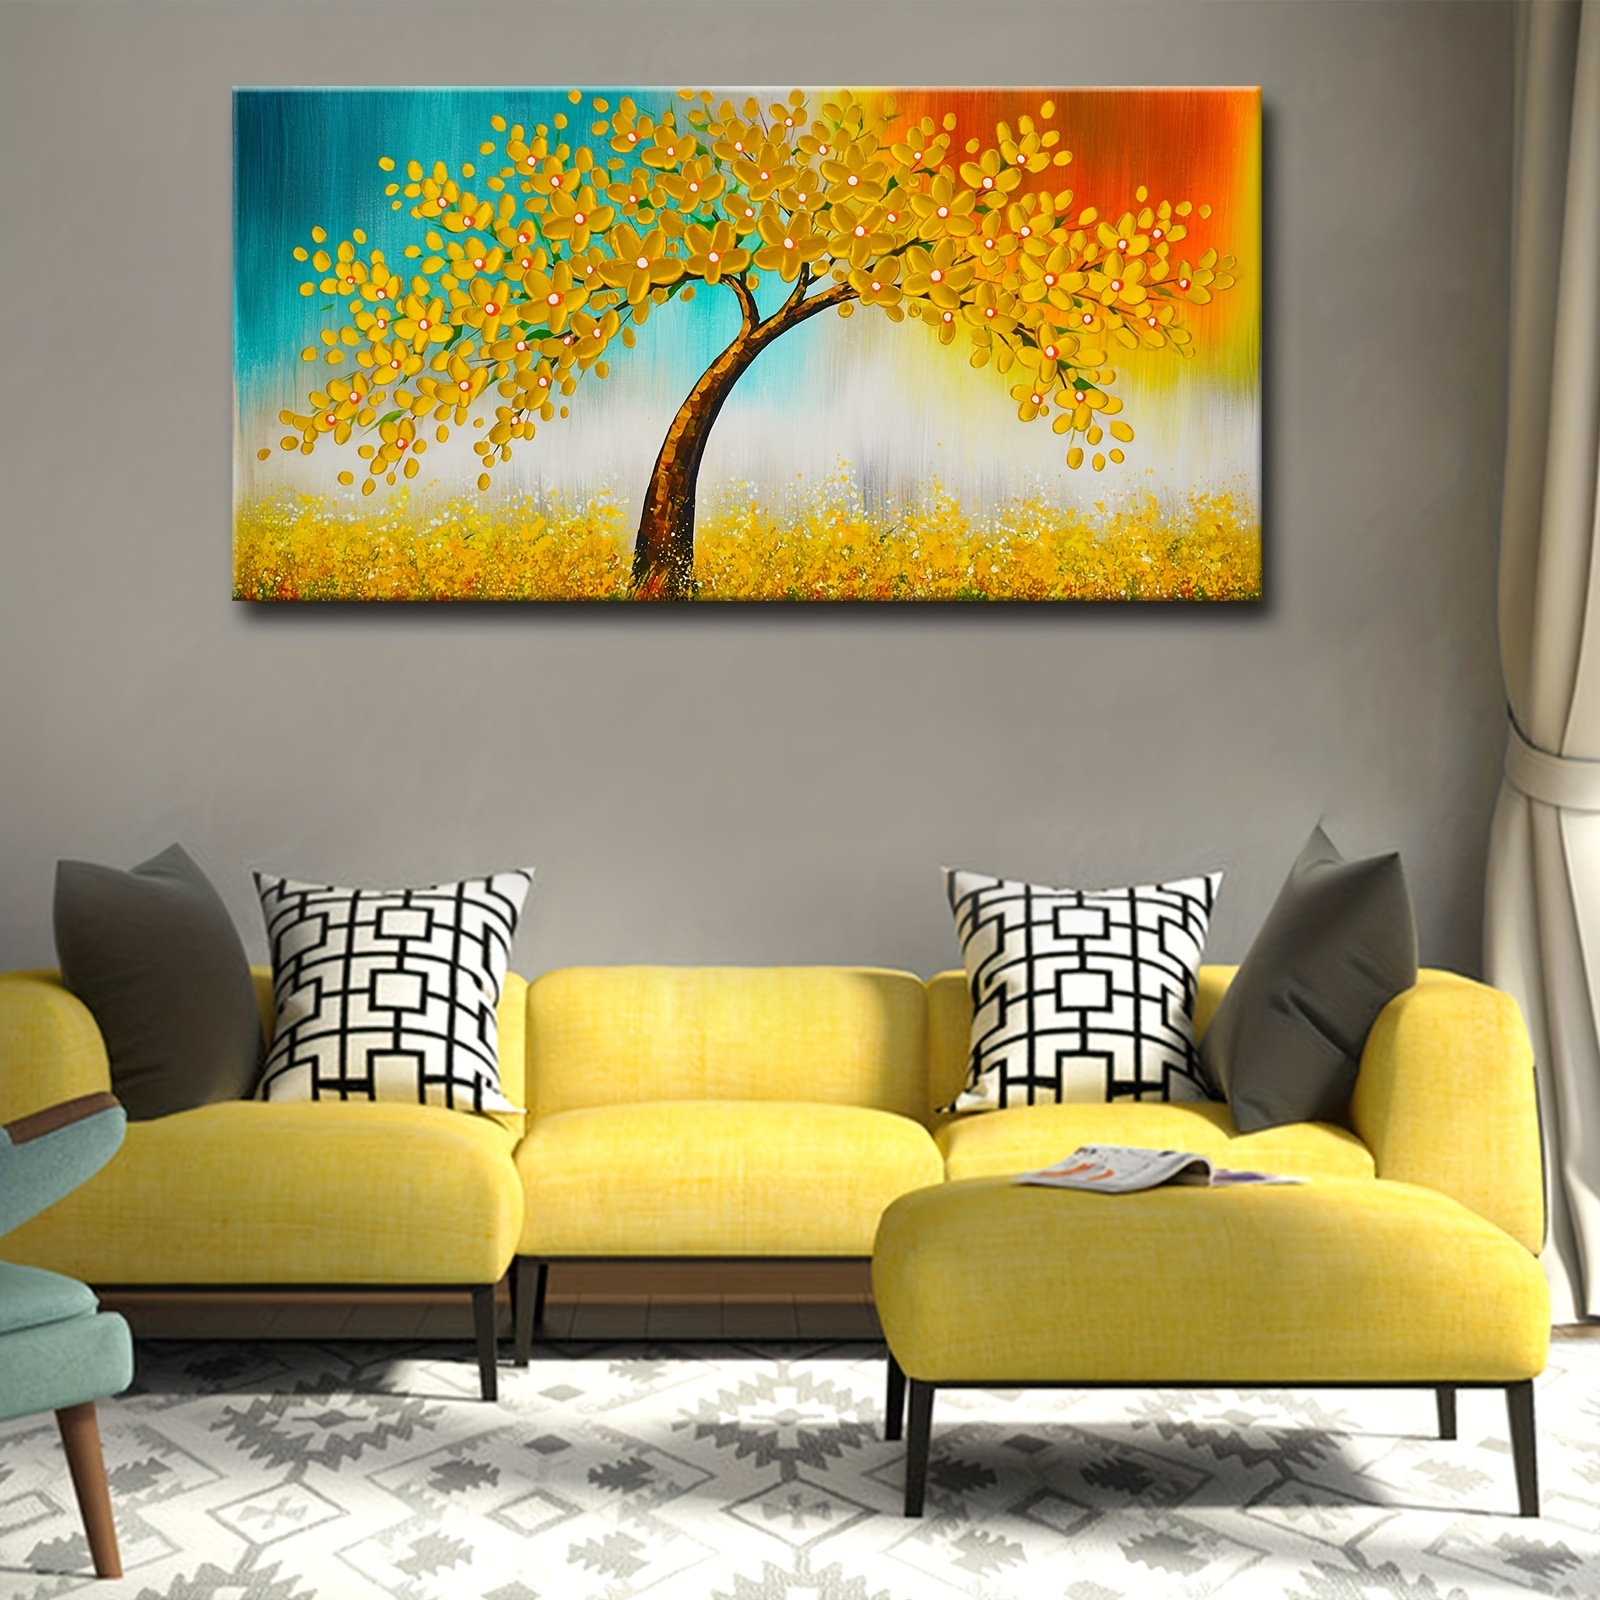 1pc Colorful Tree Wall Decoration - Golden Flower Canvas Painting - Home Decor - Free Shipping